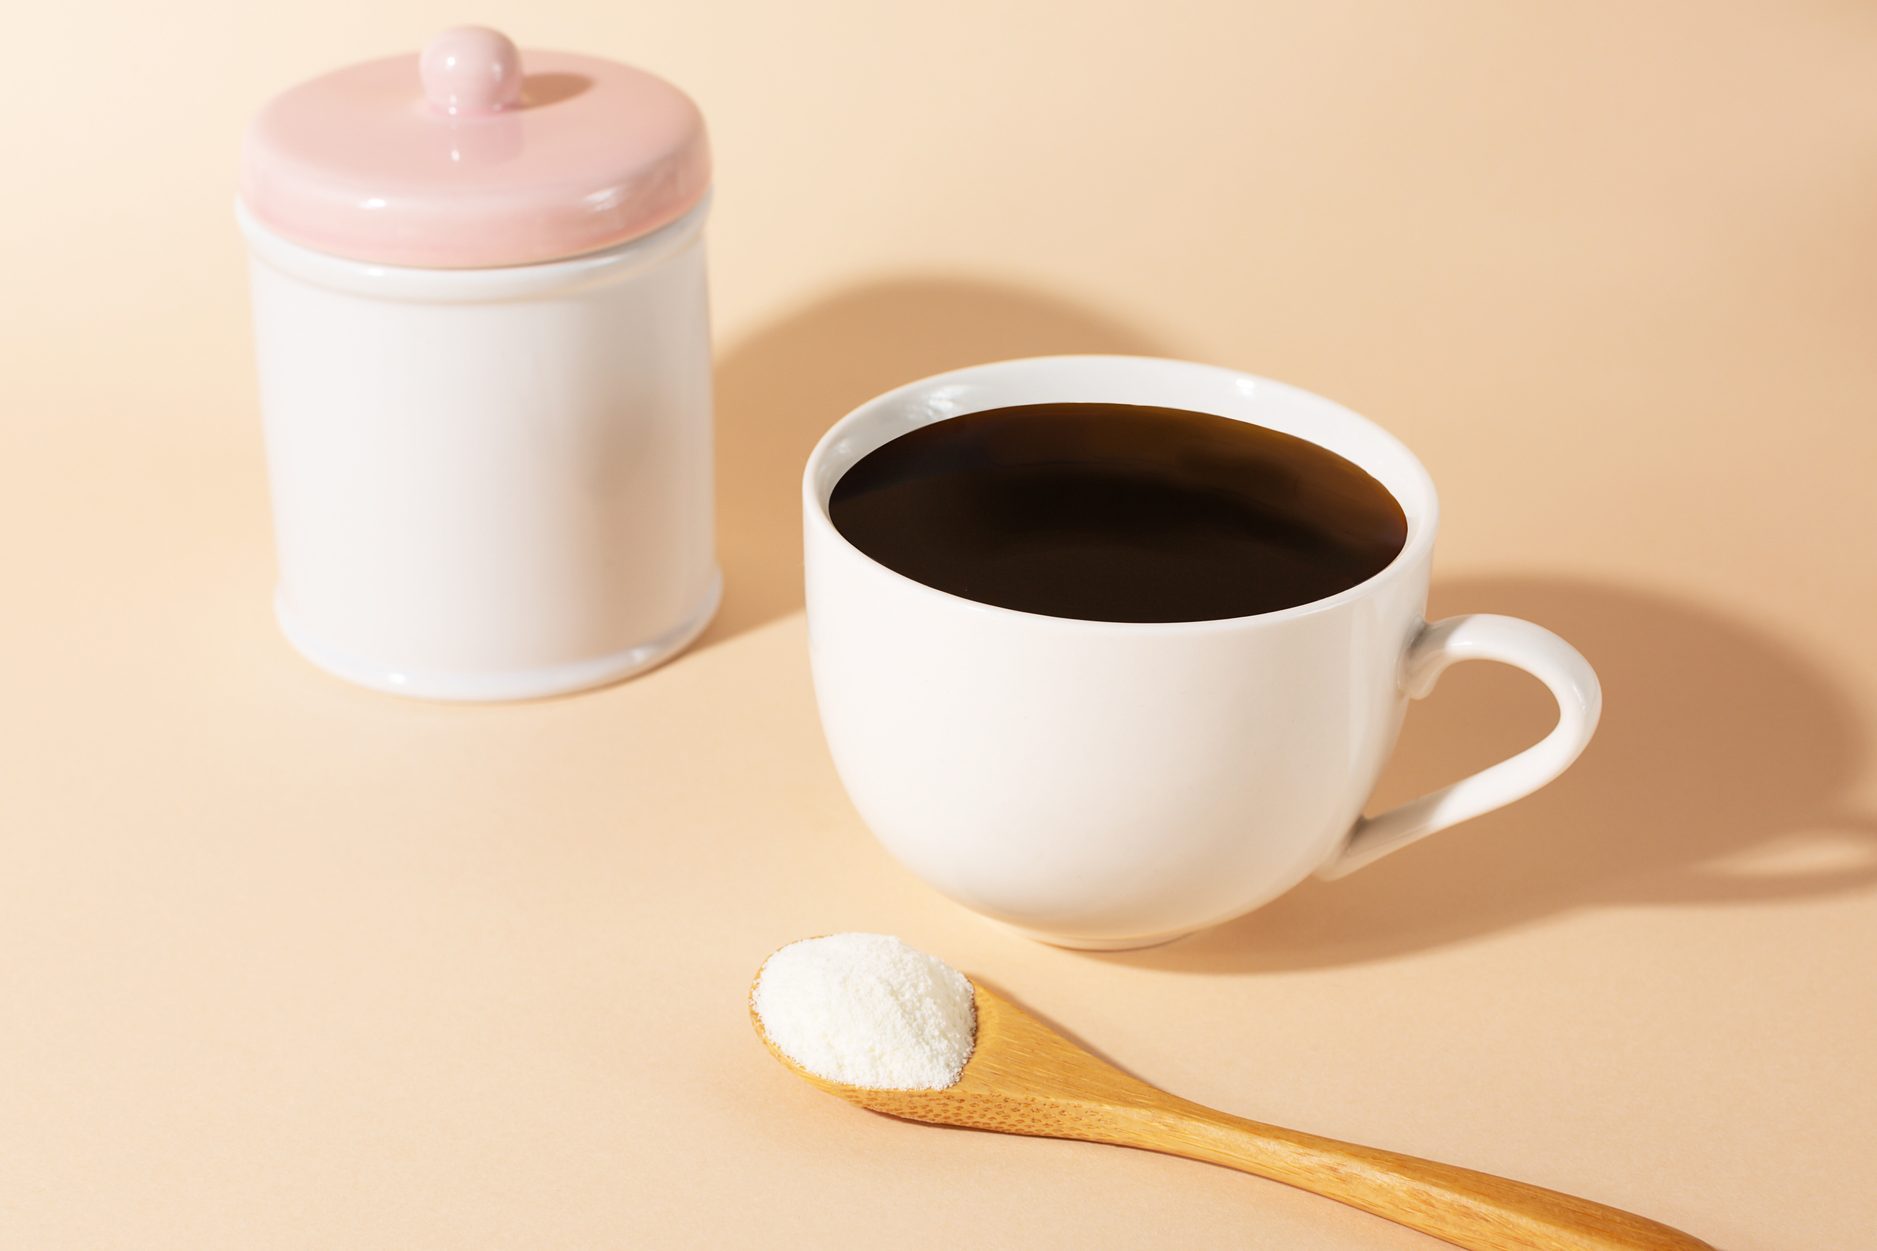 How To Blend Protein Powder In Coffee - The Oregon Dietitian